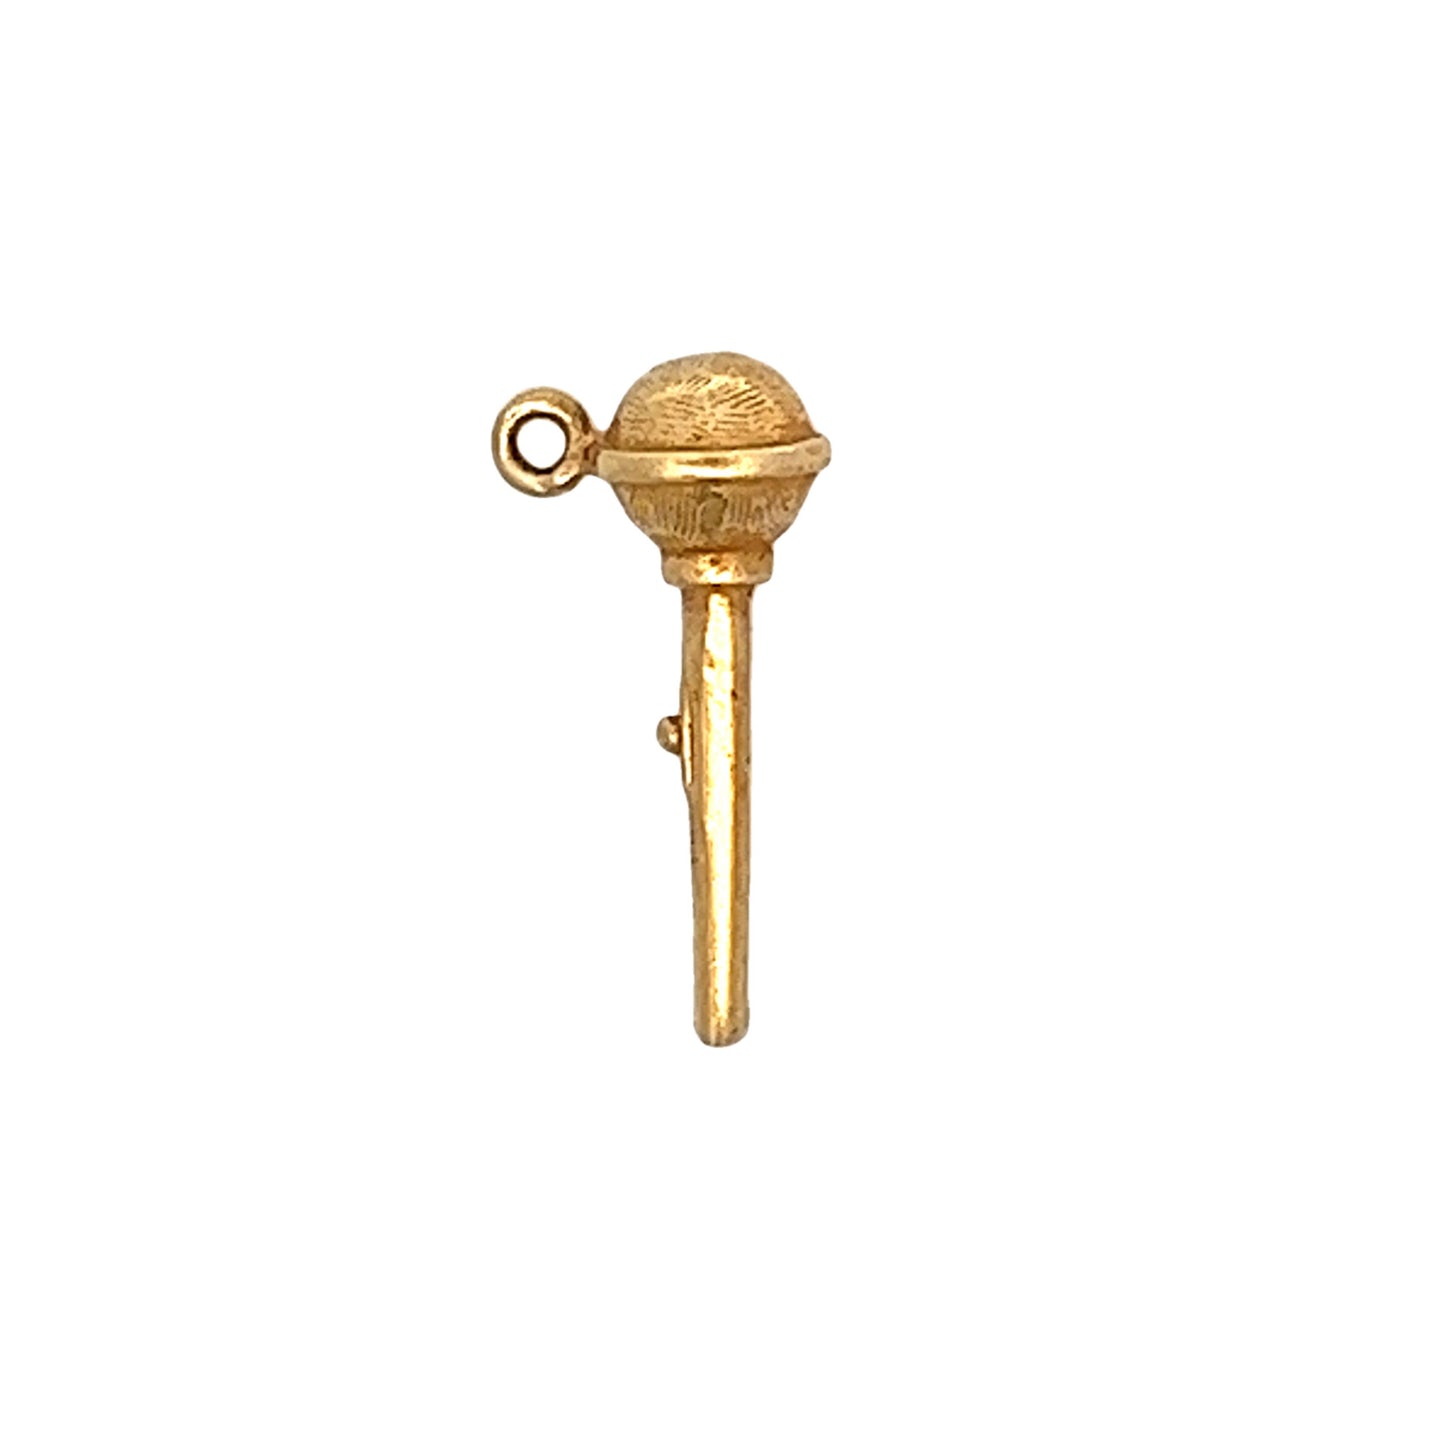 Vintage Microphone Charm in 14k Yellow Gold